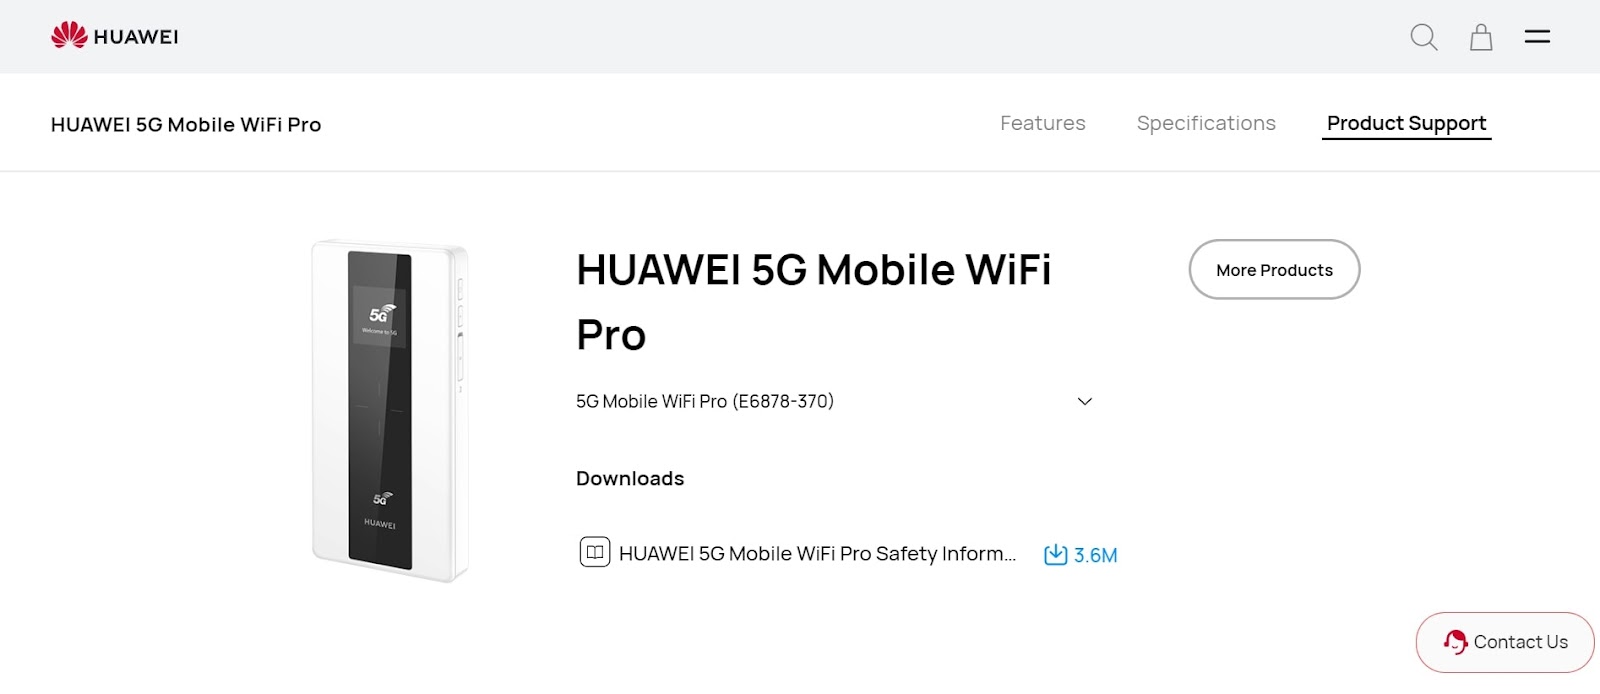 Huawei 5G E6878 - Best pocket wifi in the philippines, What are the best pocket wifi in the Philippines,
How much is Pocket WiFi in the Philippines?,
What is the fastest prepaid WiFi in the Philippines?,
Which is the best WiFi pocket router?,
Can I buy Pocket WiFi in Philippine airport?,
Which is better pocket WiFi or mobile data?,
Which is better MiFi or router?,
best pocket wifi in the philippines,
best pocket wifi philippines review,
top 5 pocket wifi philippines,
